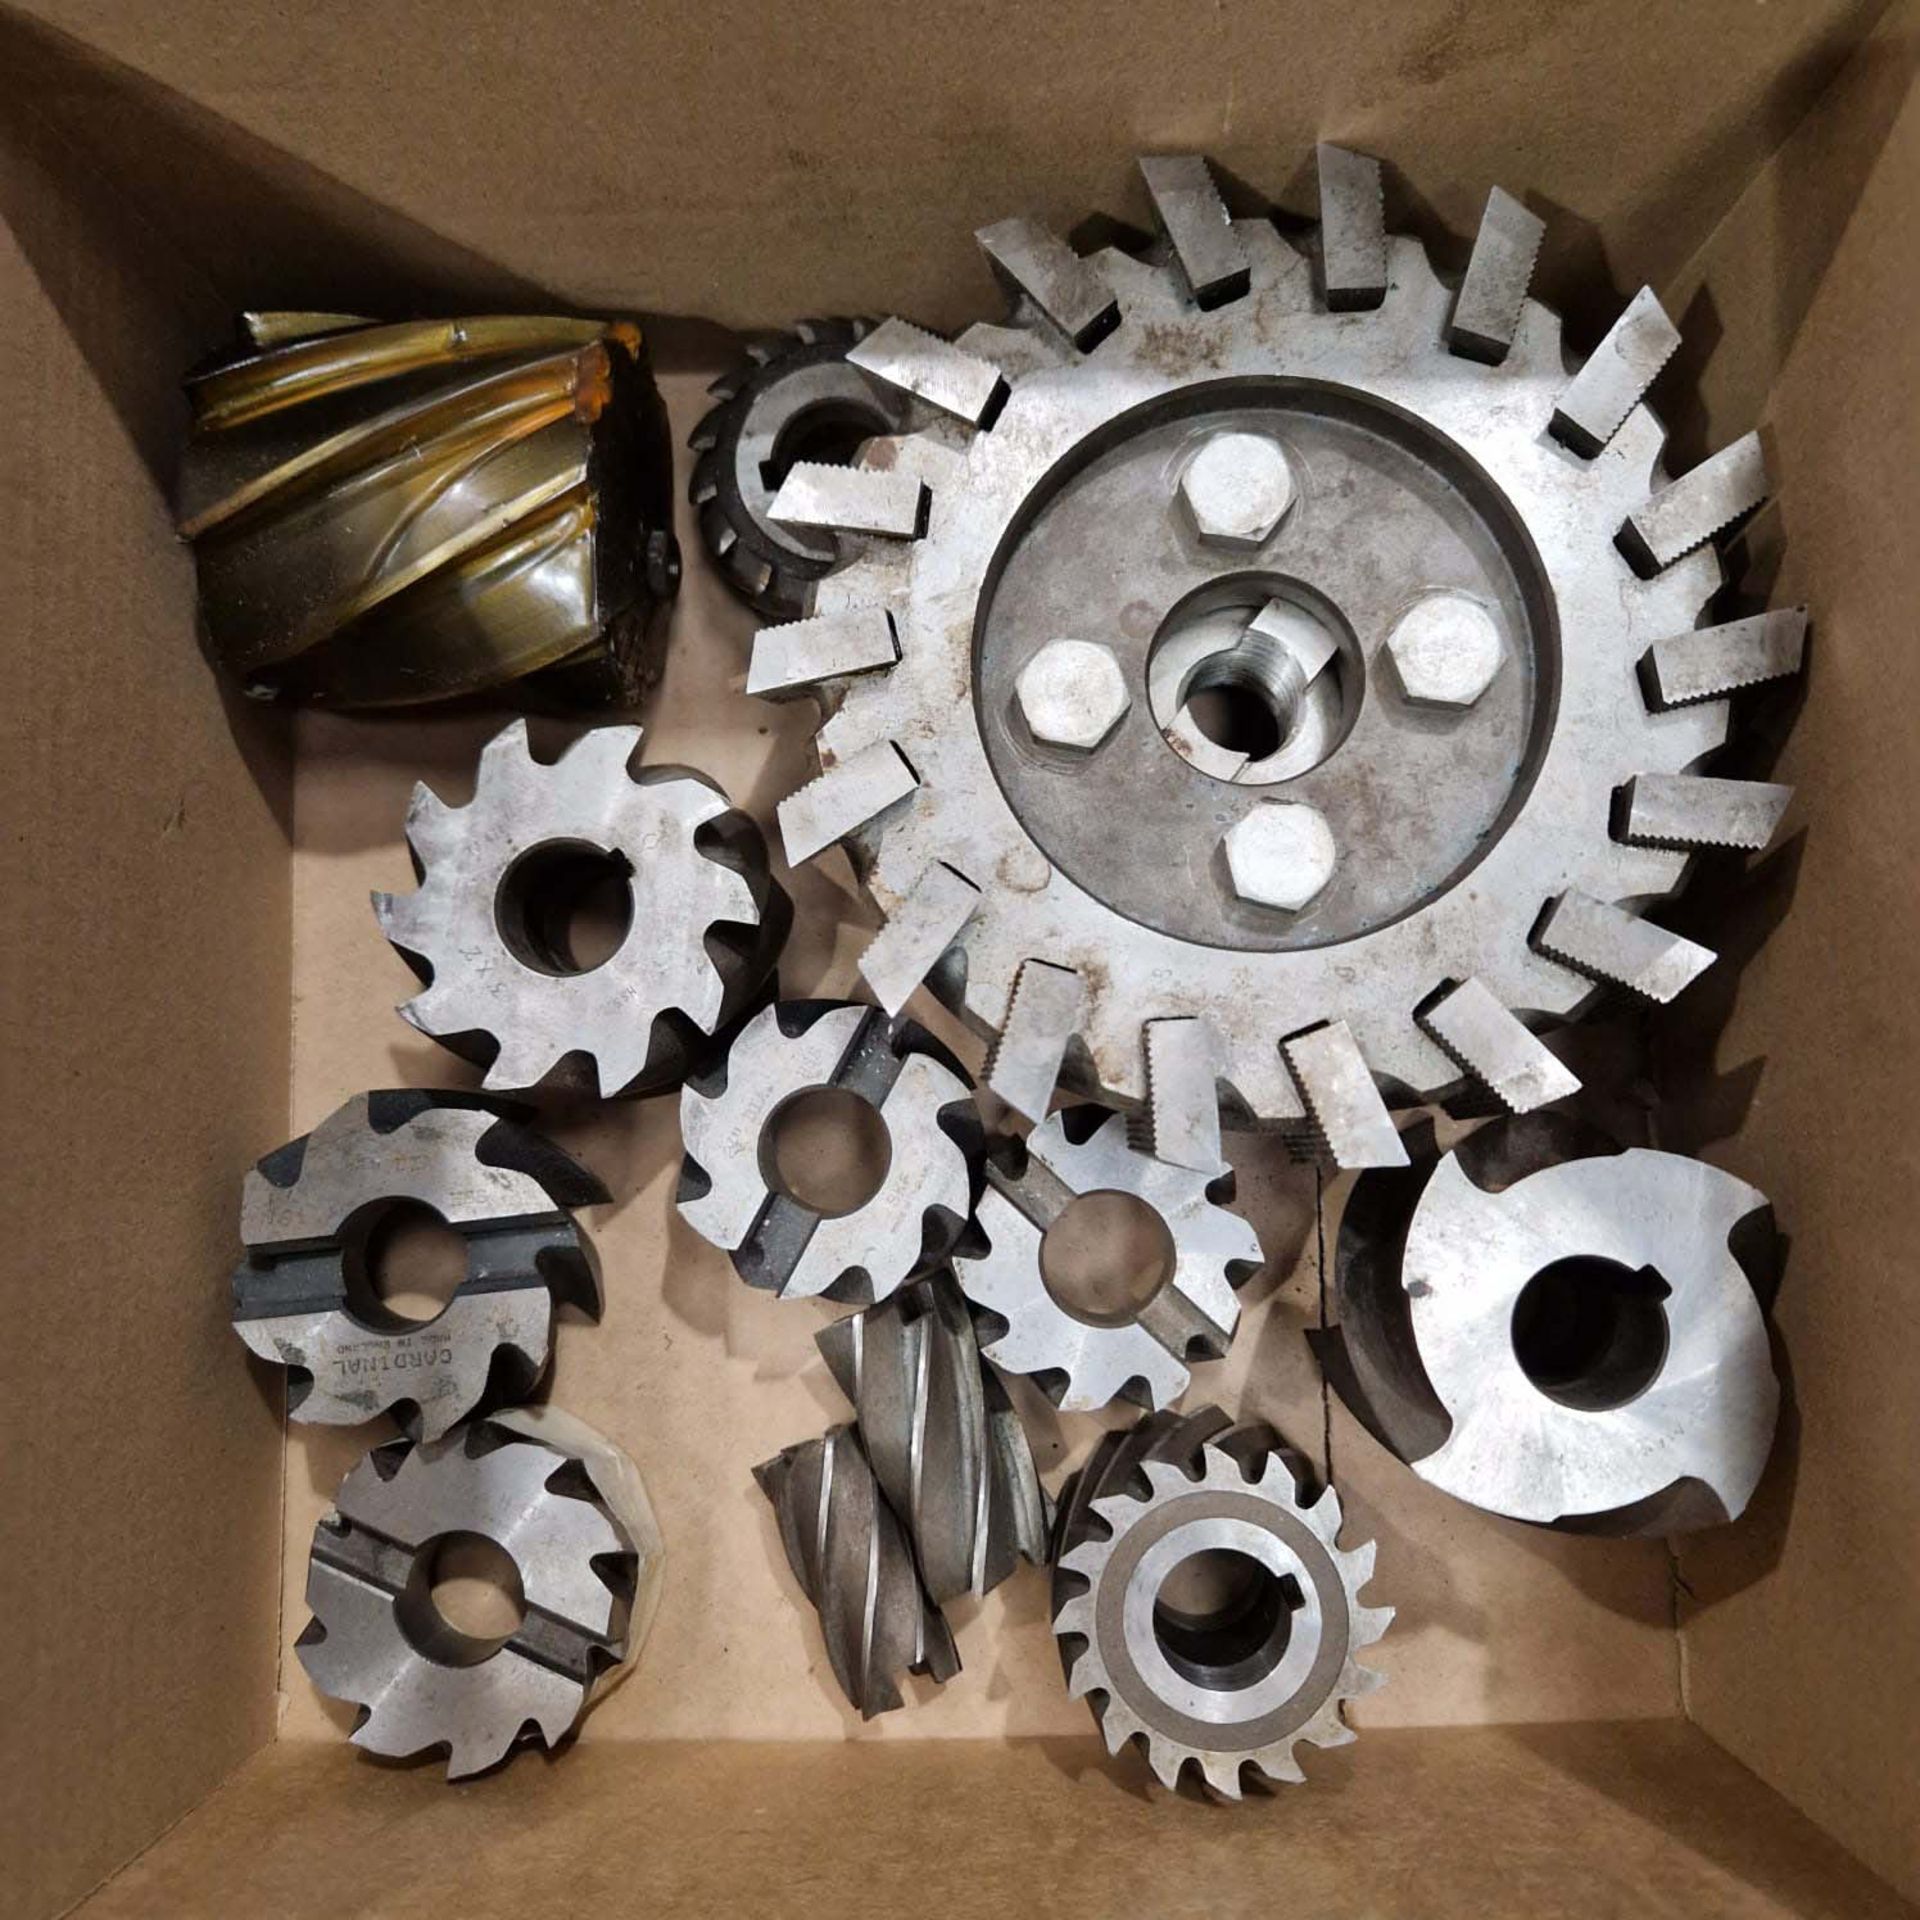 Quantity of Miscellaneous Milling Cutters.